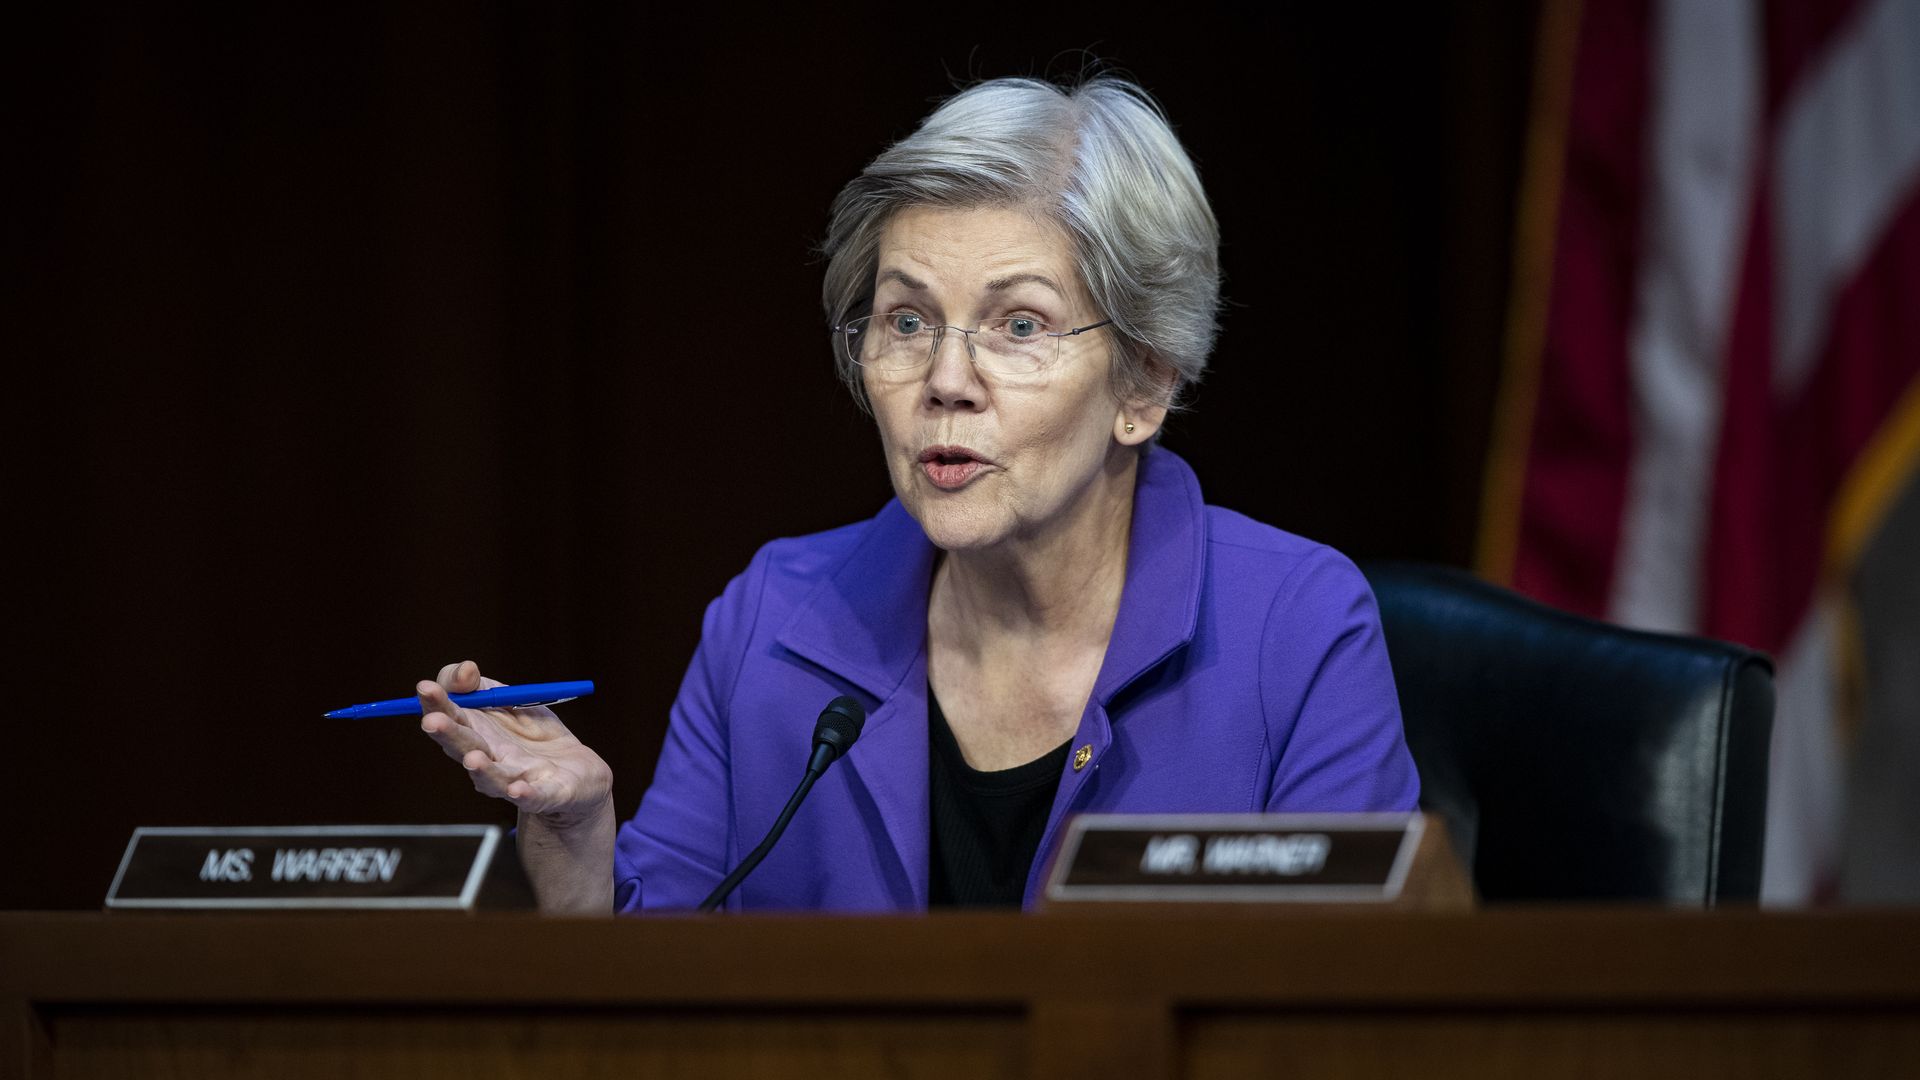 Senator Elizabeth Warren, a Democrat from Massachusetts, speaks during a Senate Banking, Housing, and Urban Affairs Committee hearing in Washington, DC, US, on Tuesday, March 7, 2023.